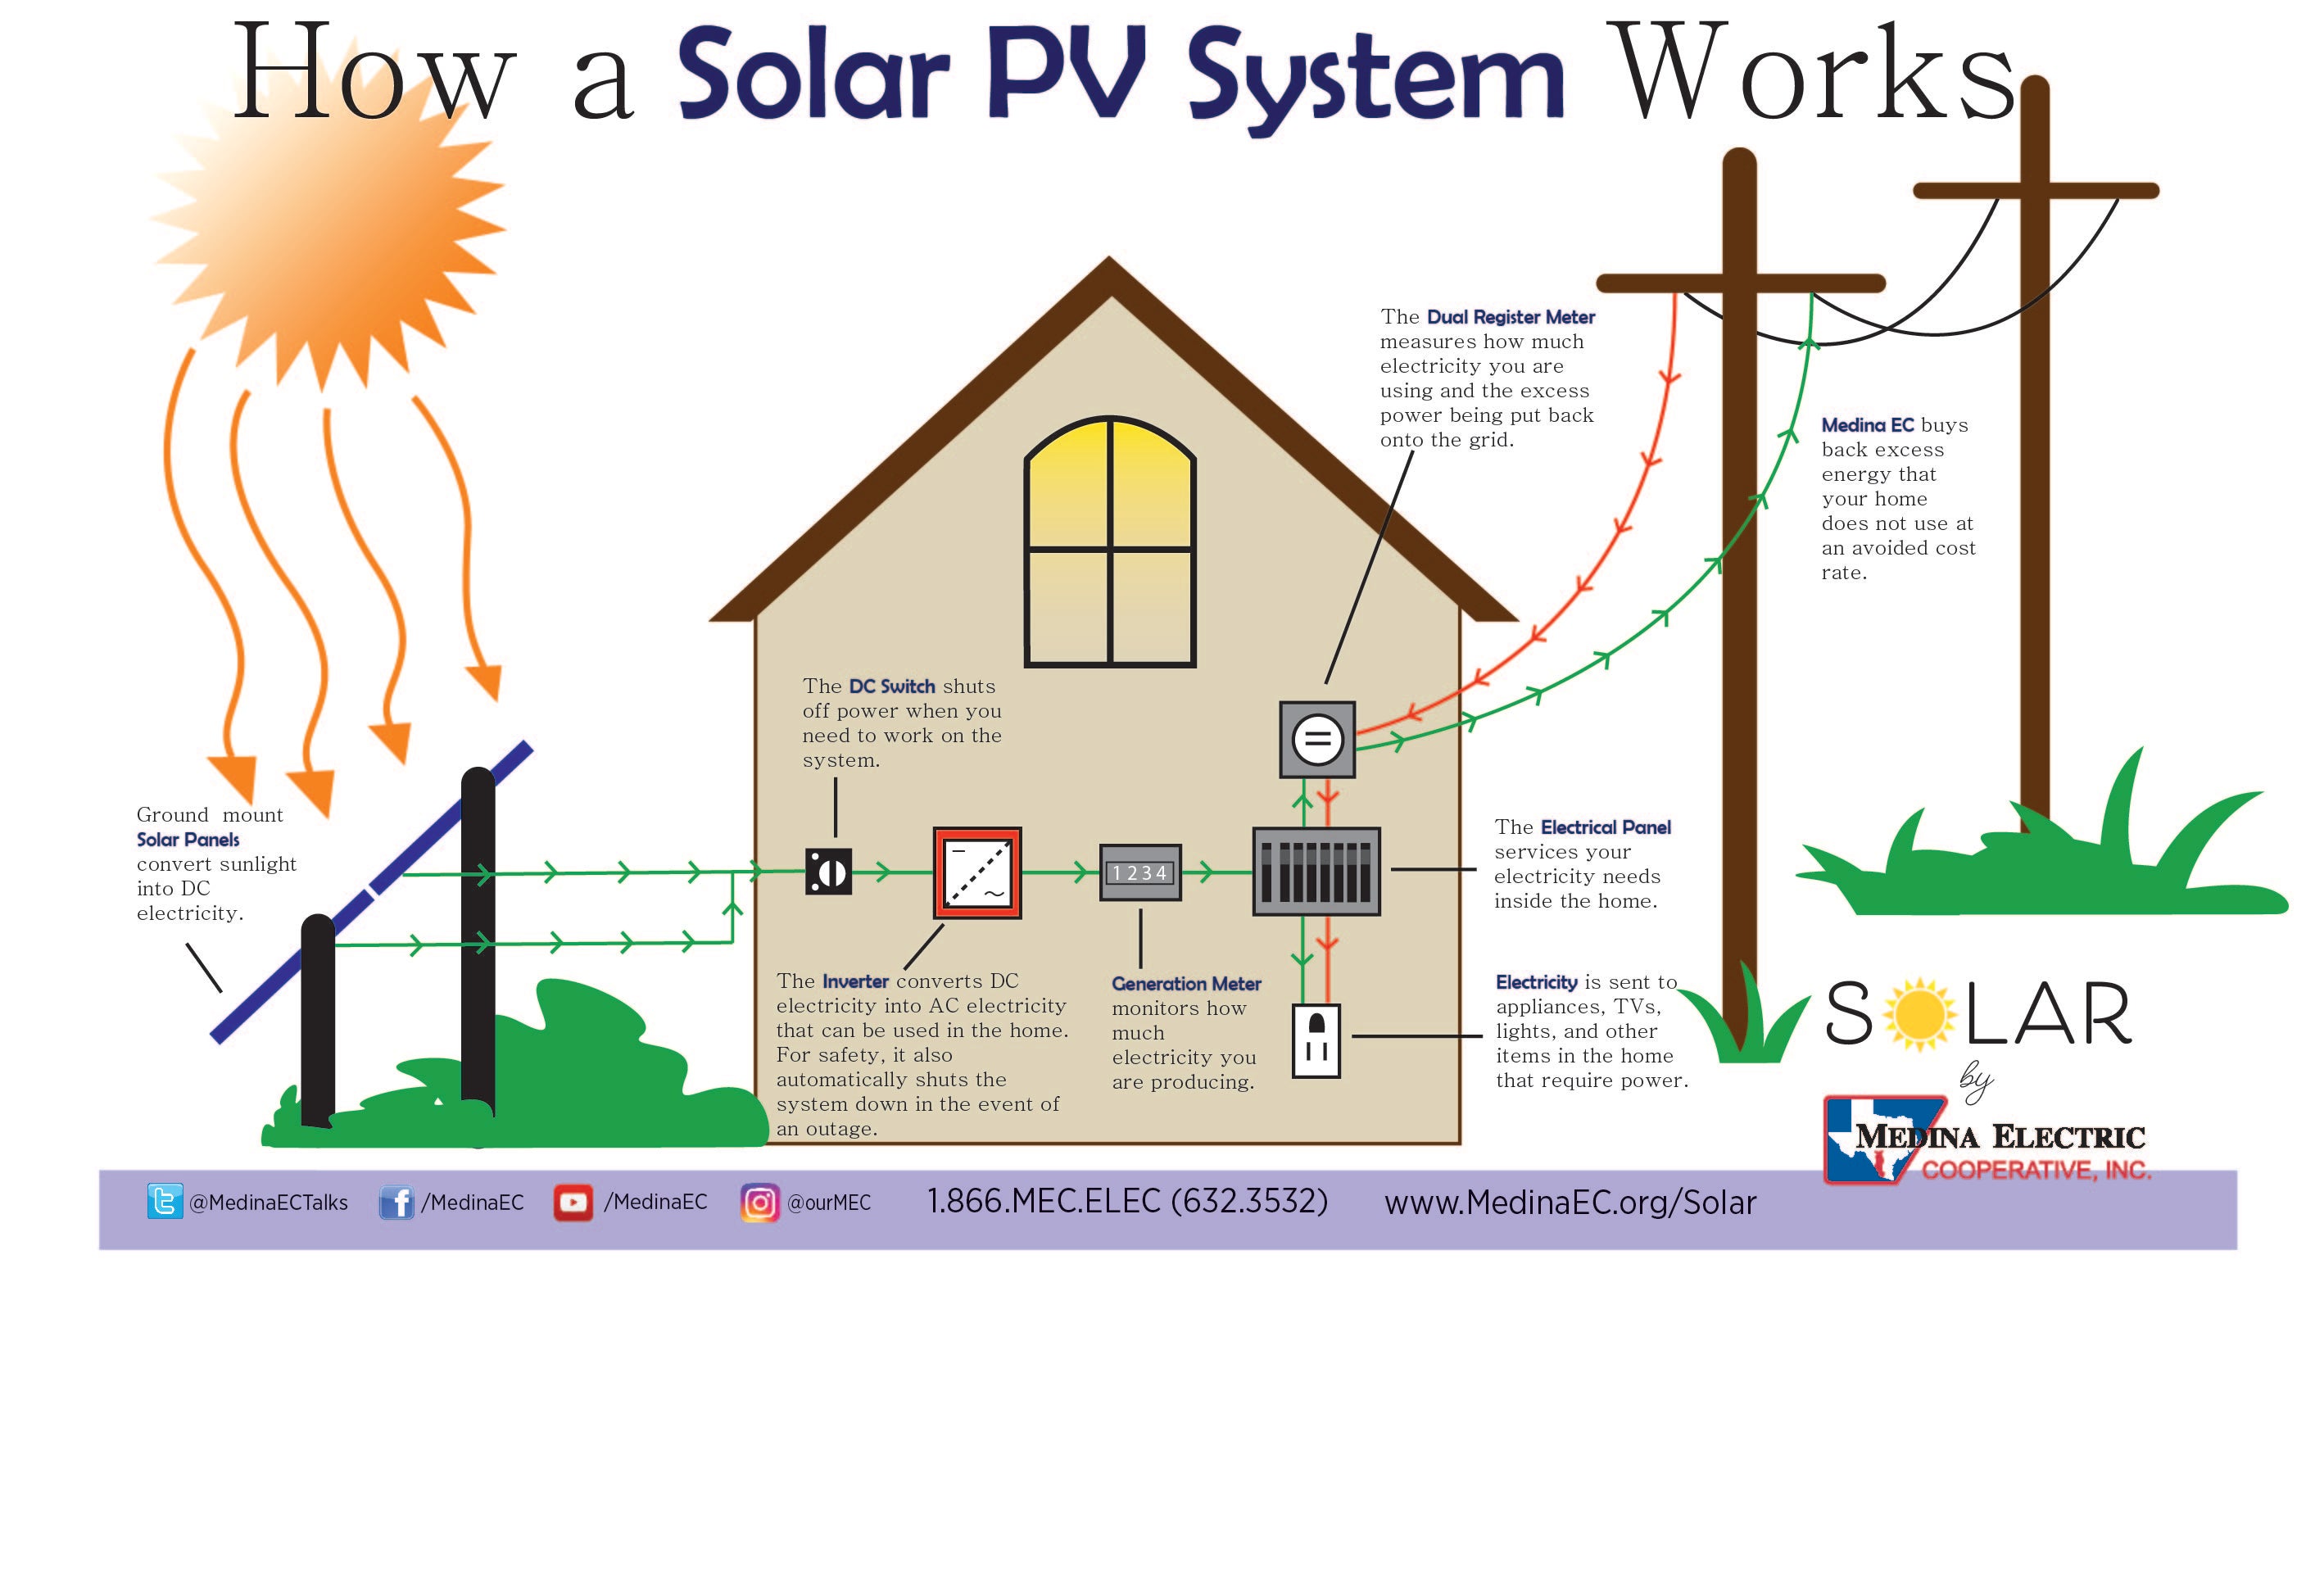 How Solar Works graphic